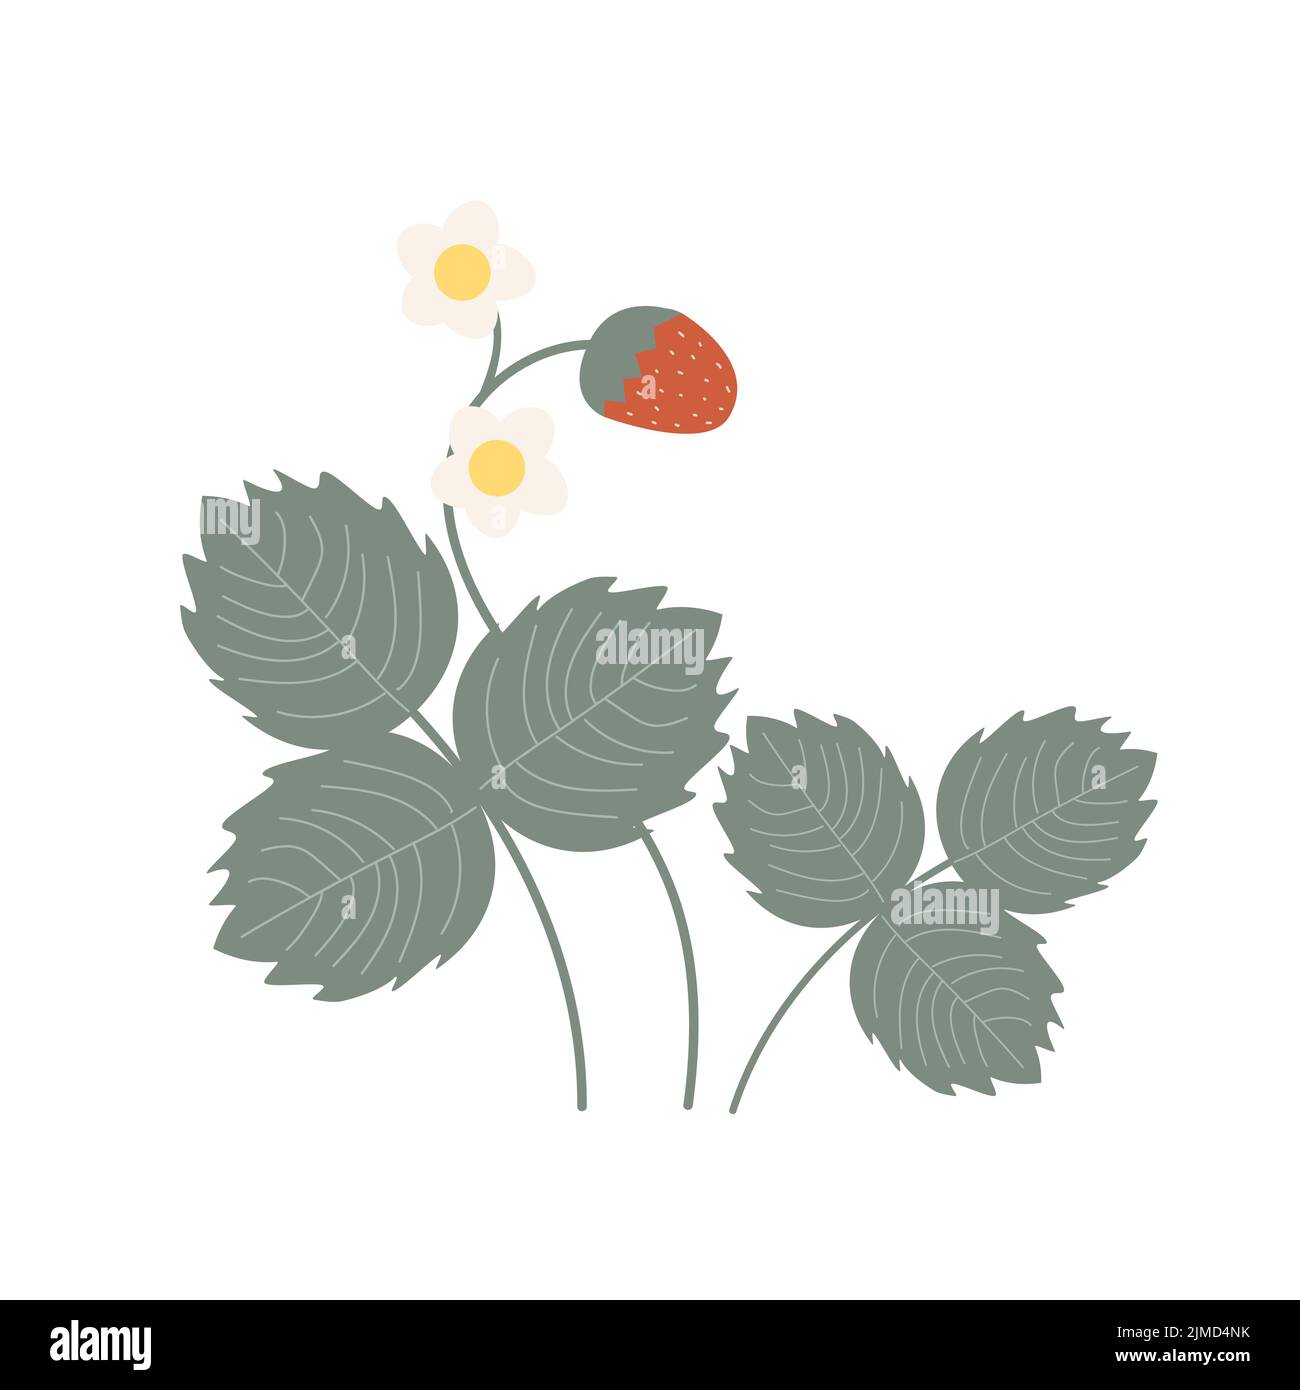 Bush of wild strawberries with flowers, berry, and leaves. Doodle vector illustration. Stock Vector